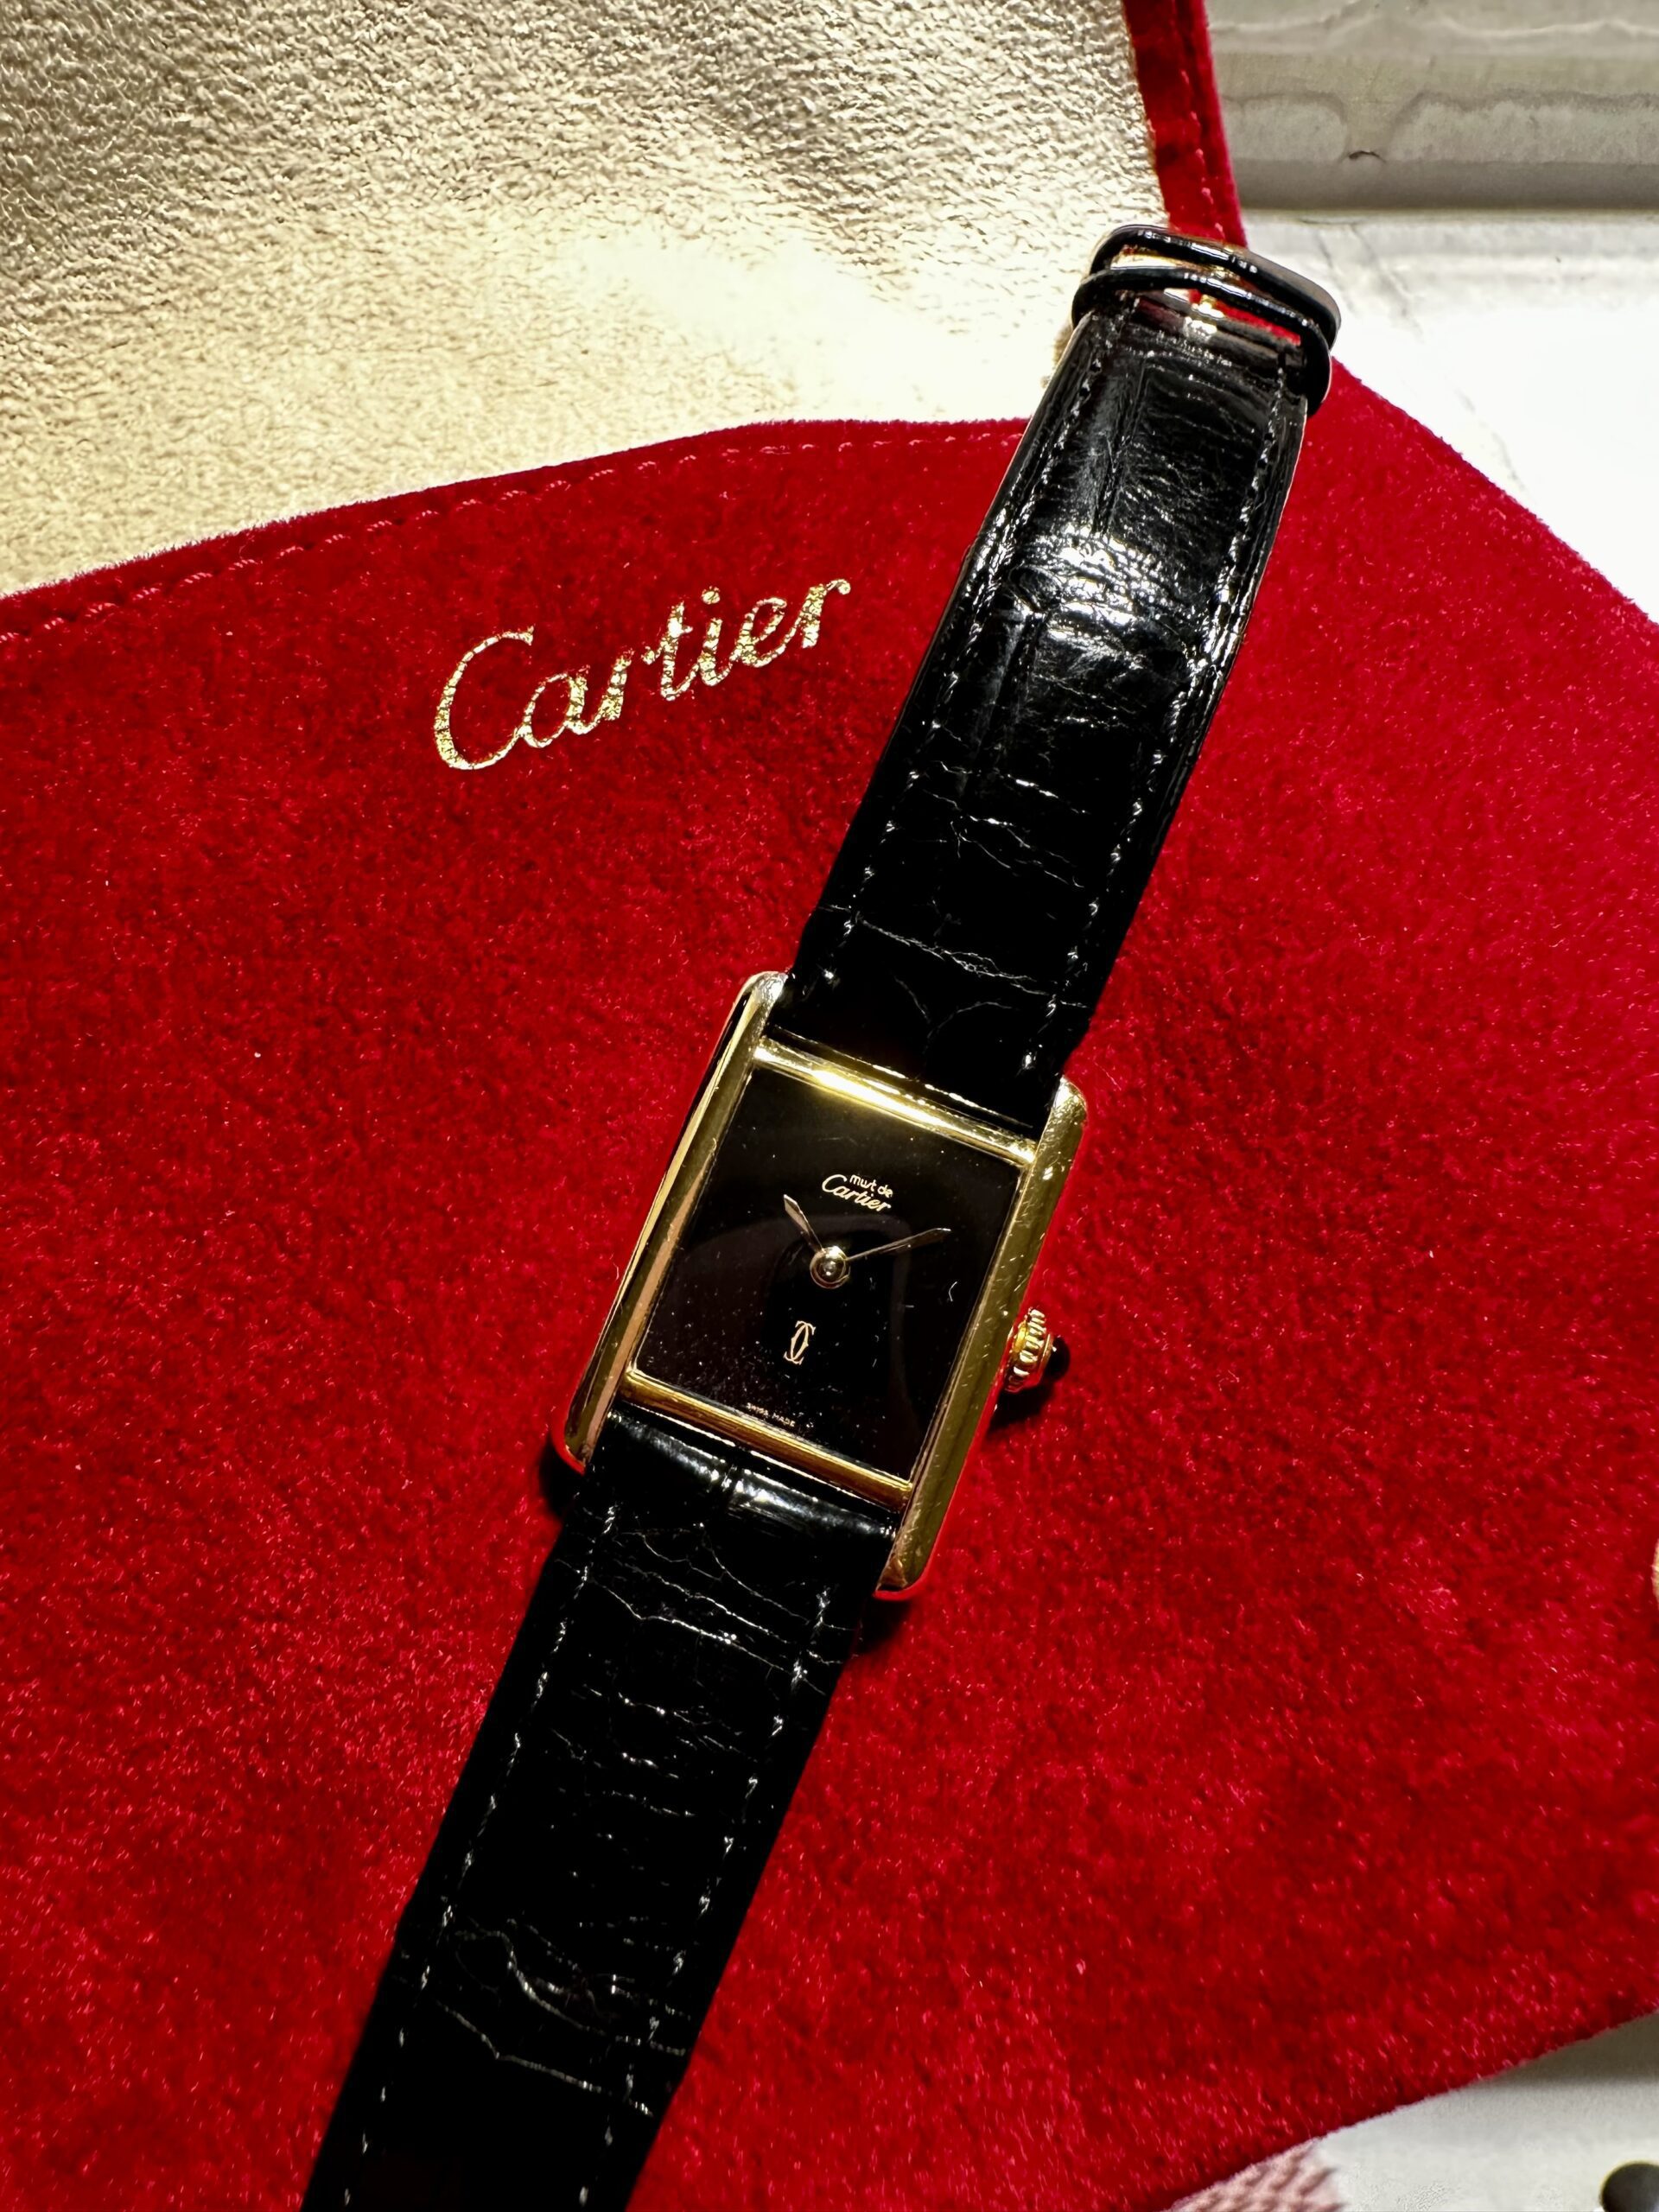 Vintage Cartier Tank Le must watch after restoration | Ode2style.com